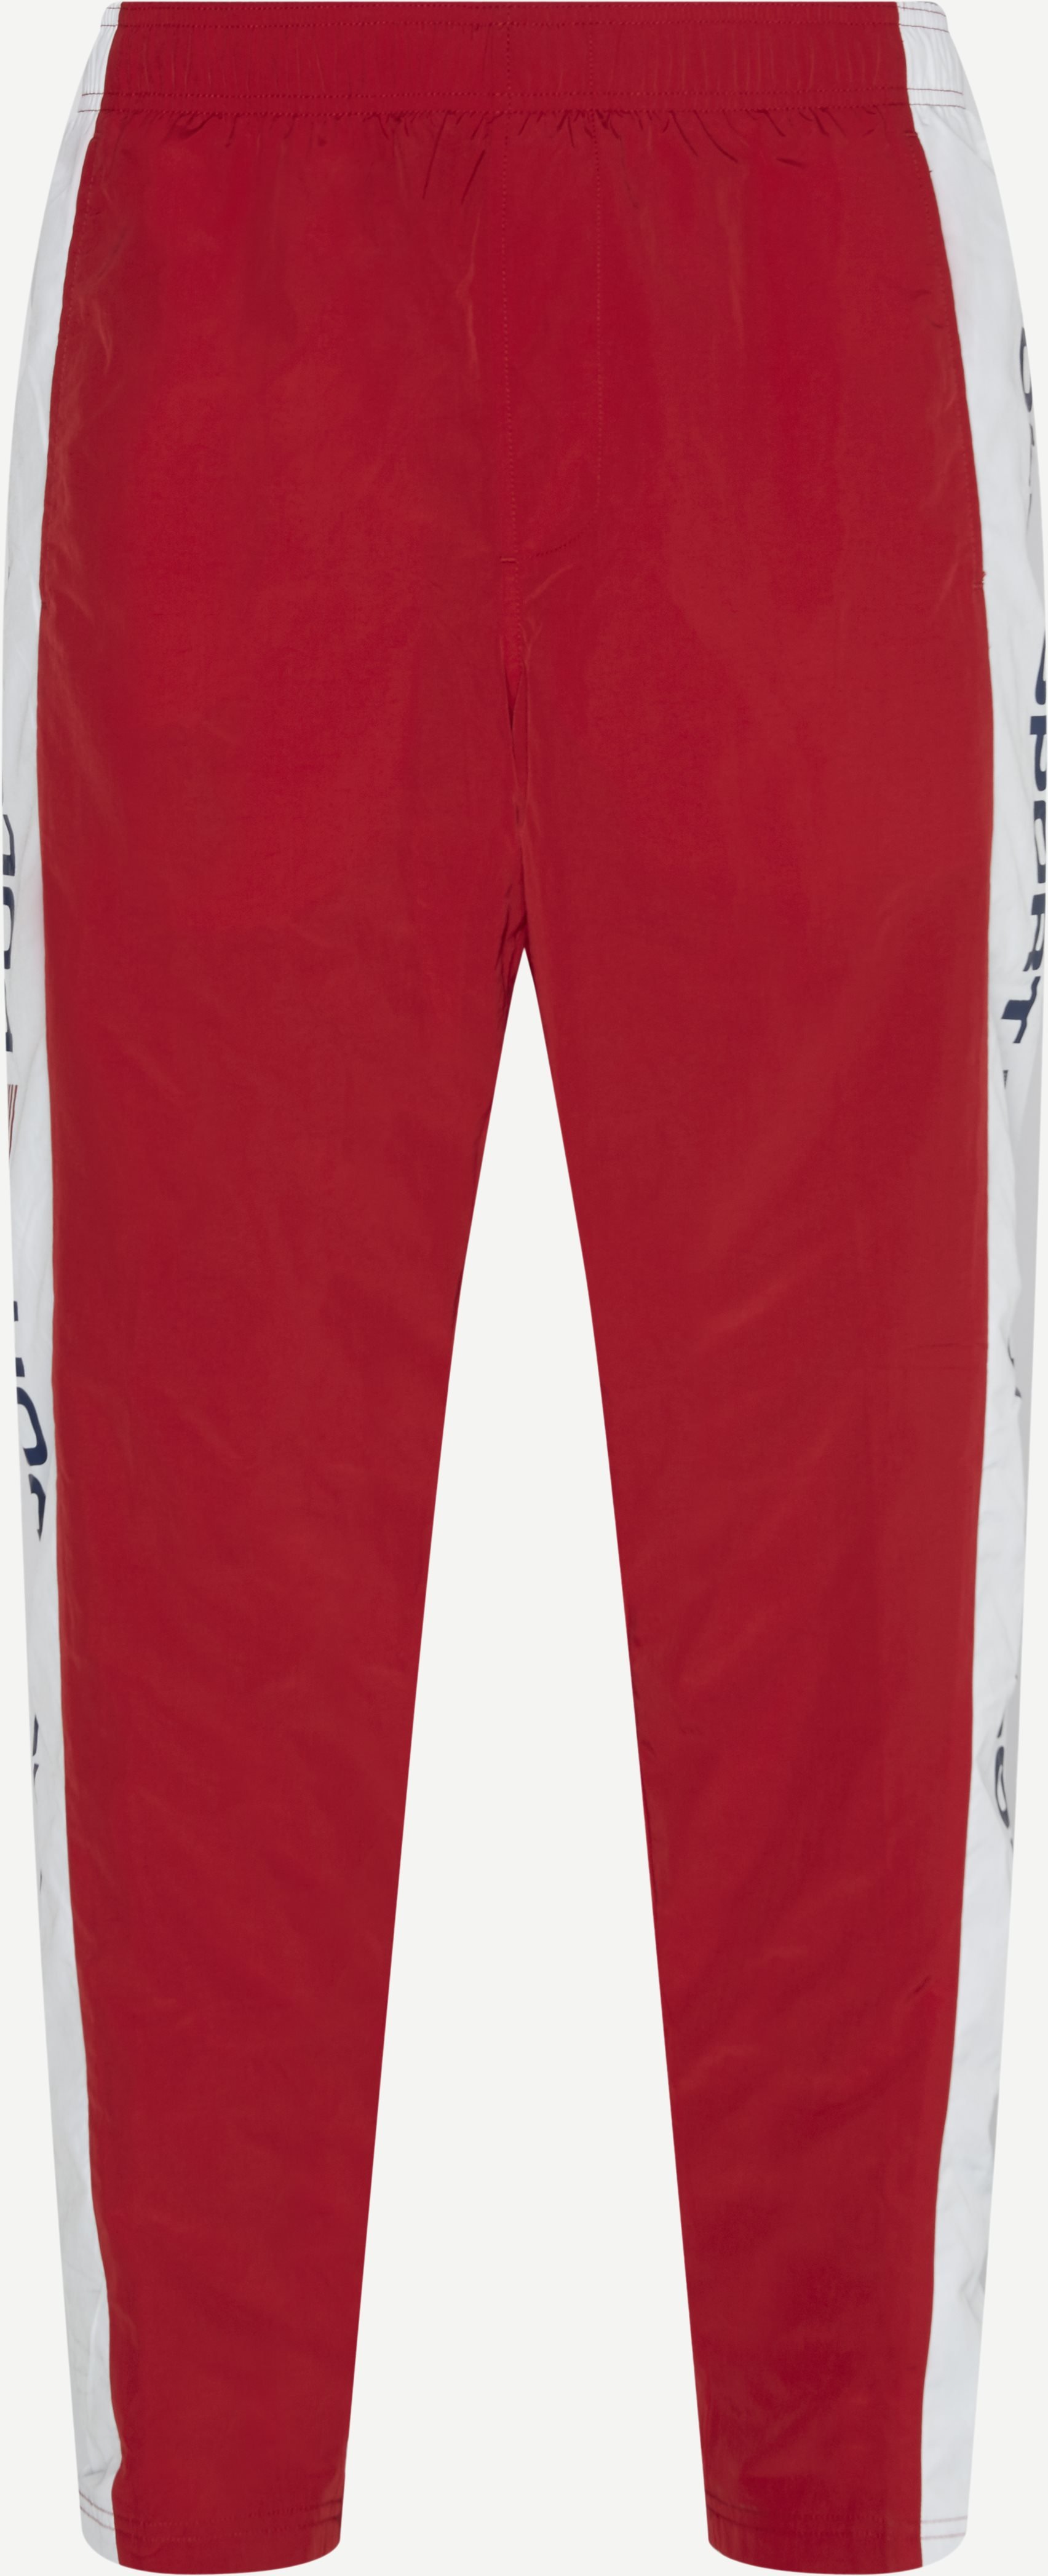 Rote Hose in limitierter Auflage - Hosen - Oversize fit - Rot